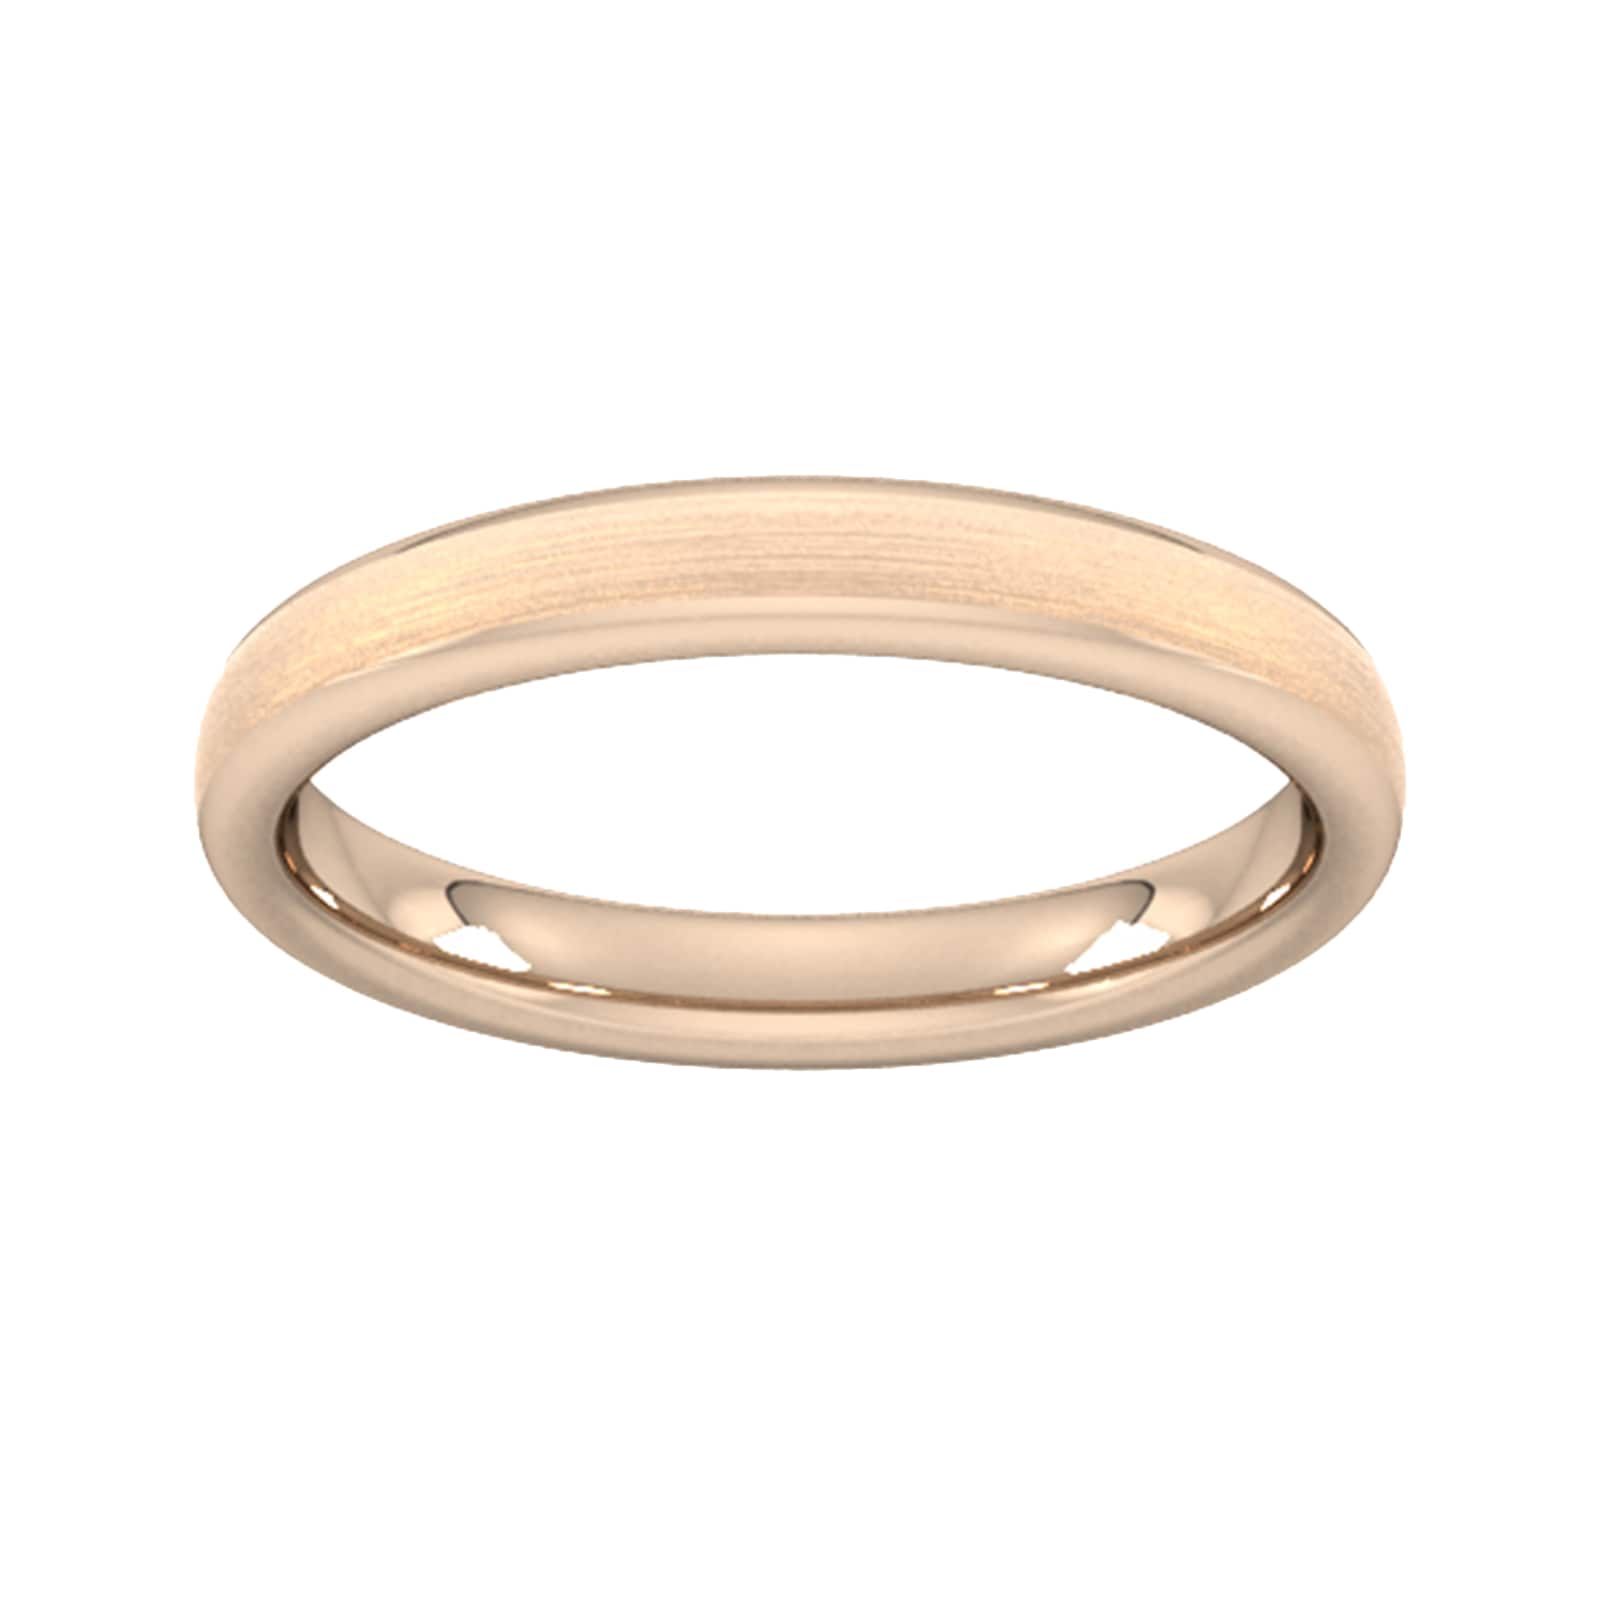 3mm Traditional Court Heavy Matt Finished Wedding Ring In 9 Carat Rose Gold - Ring Size L